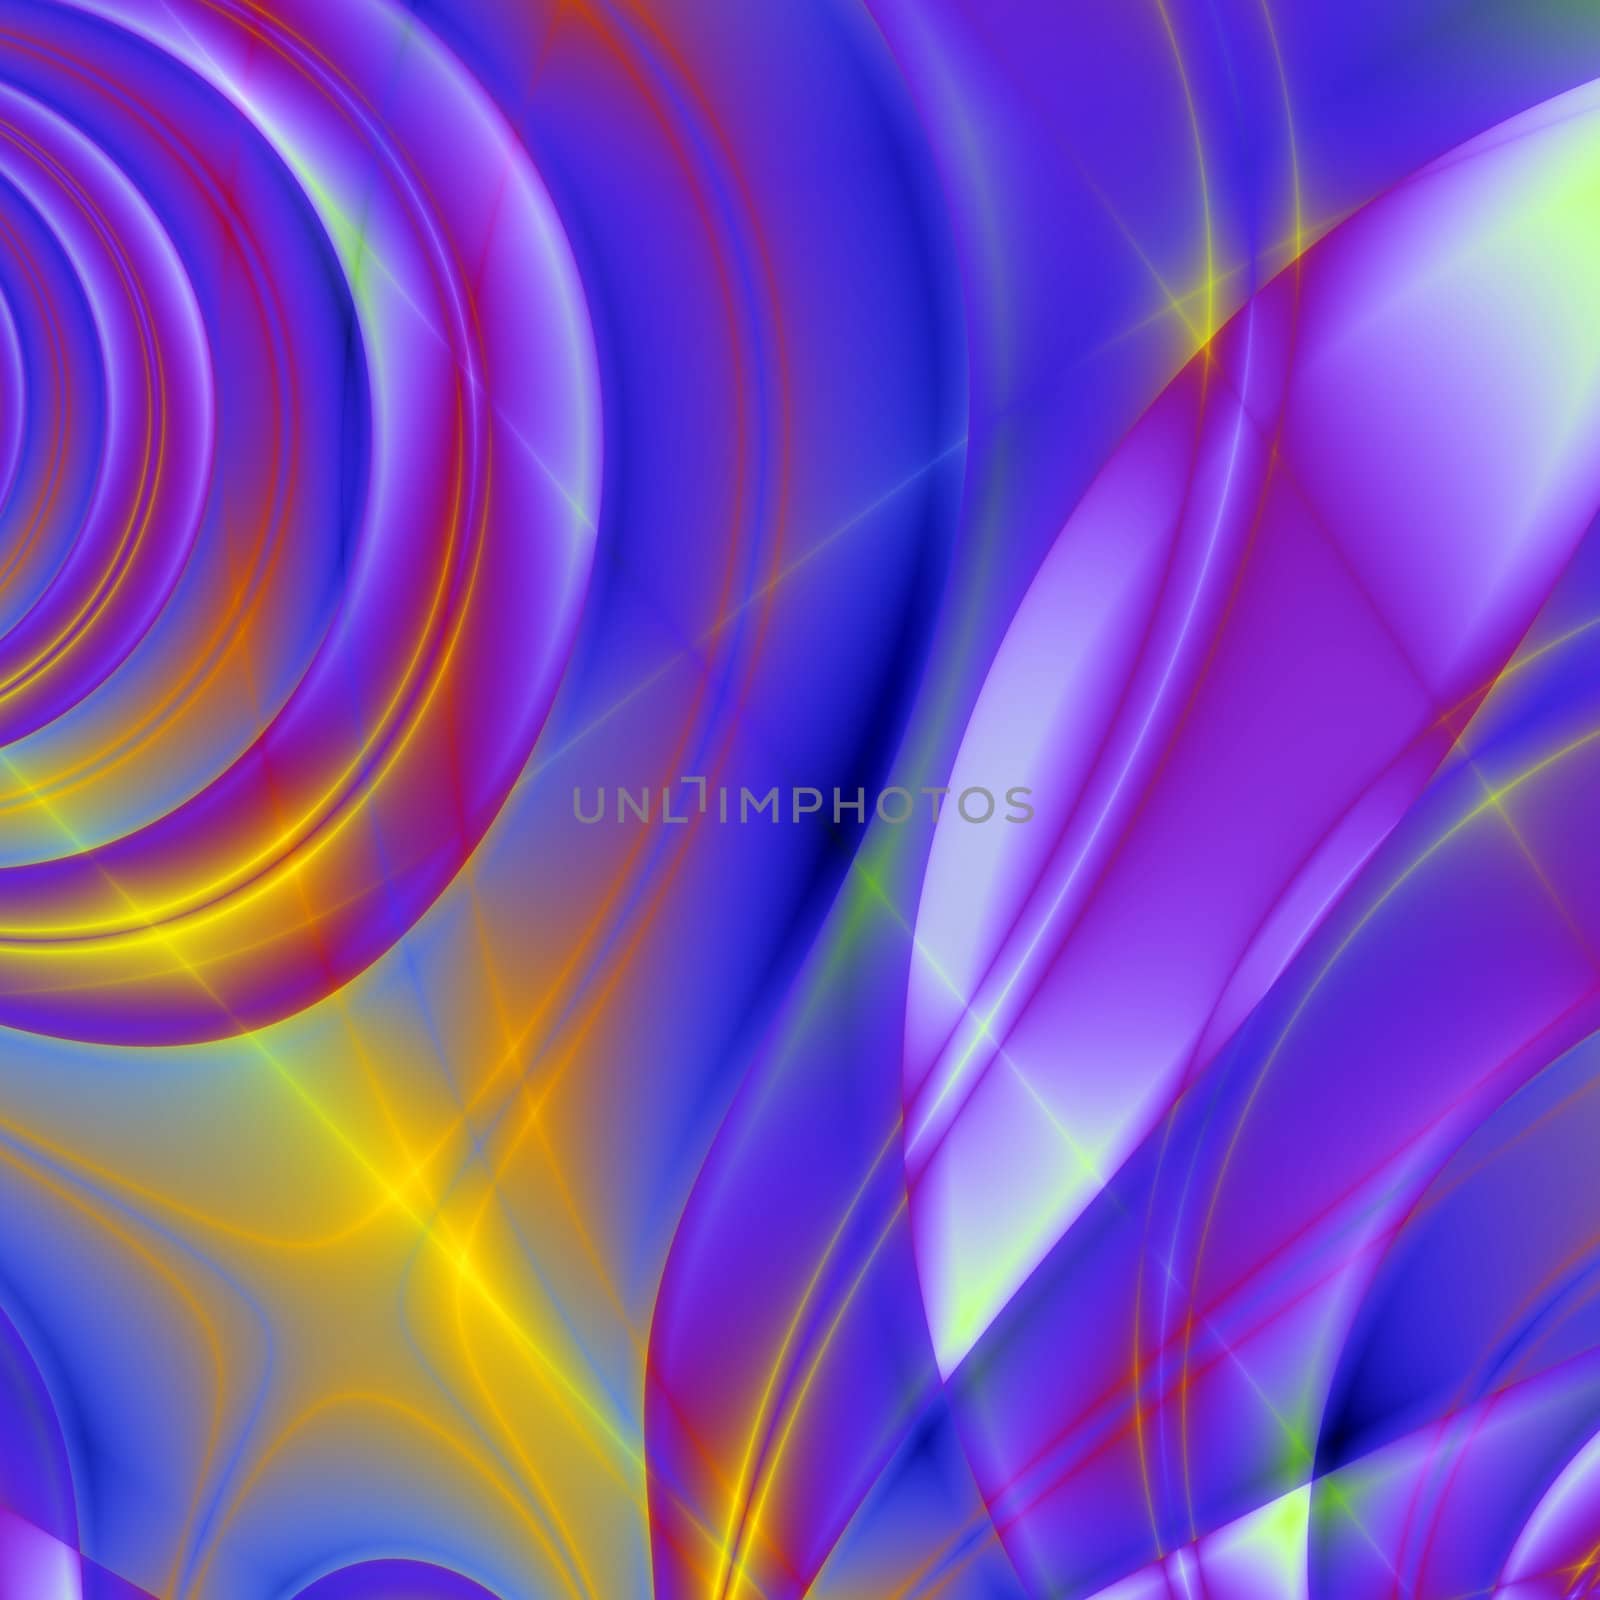 abstract smooth divorces of yellow, blue, purple and green colors